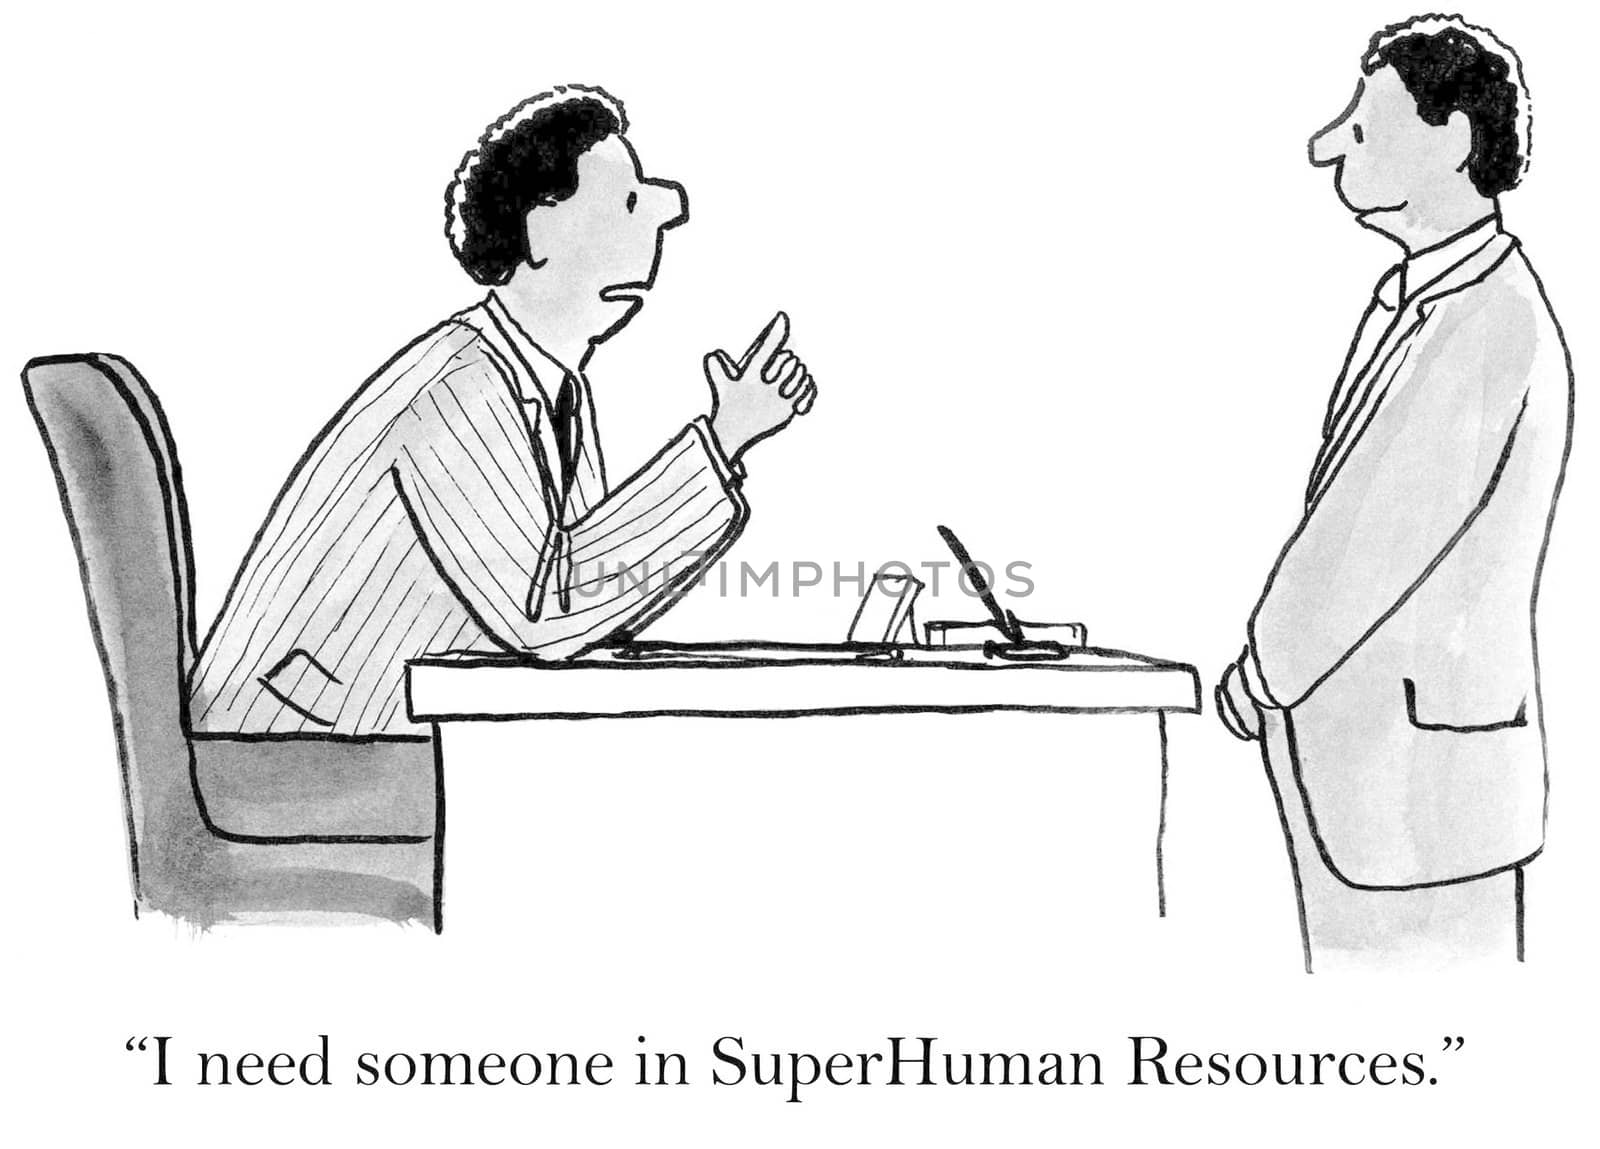 Human Resources by andrewgenn